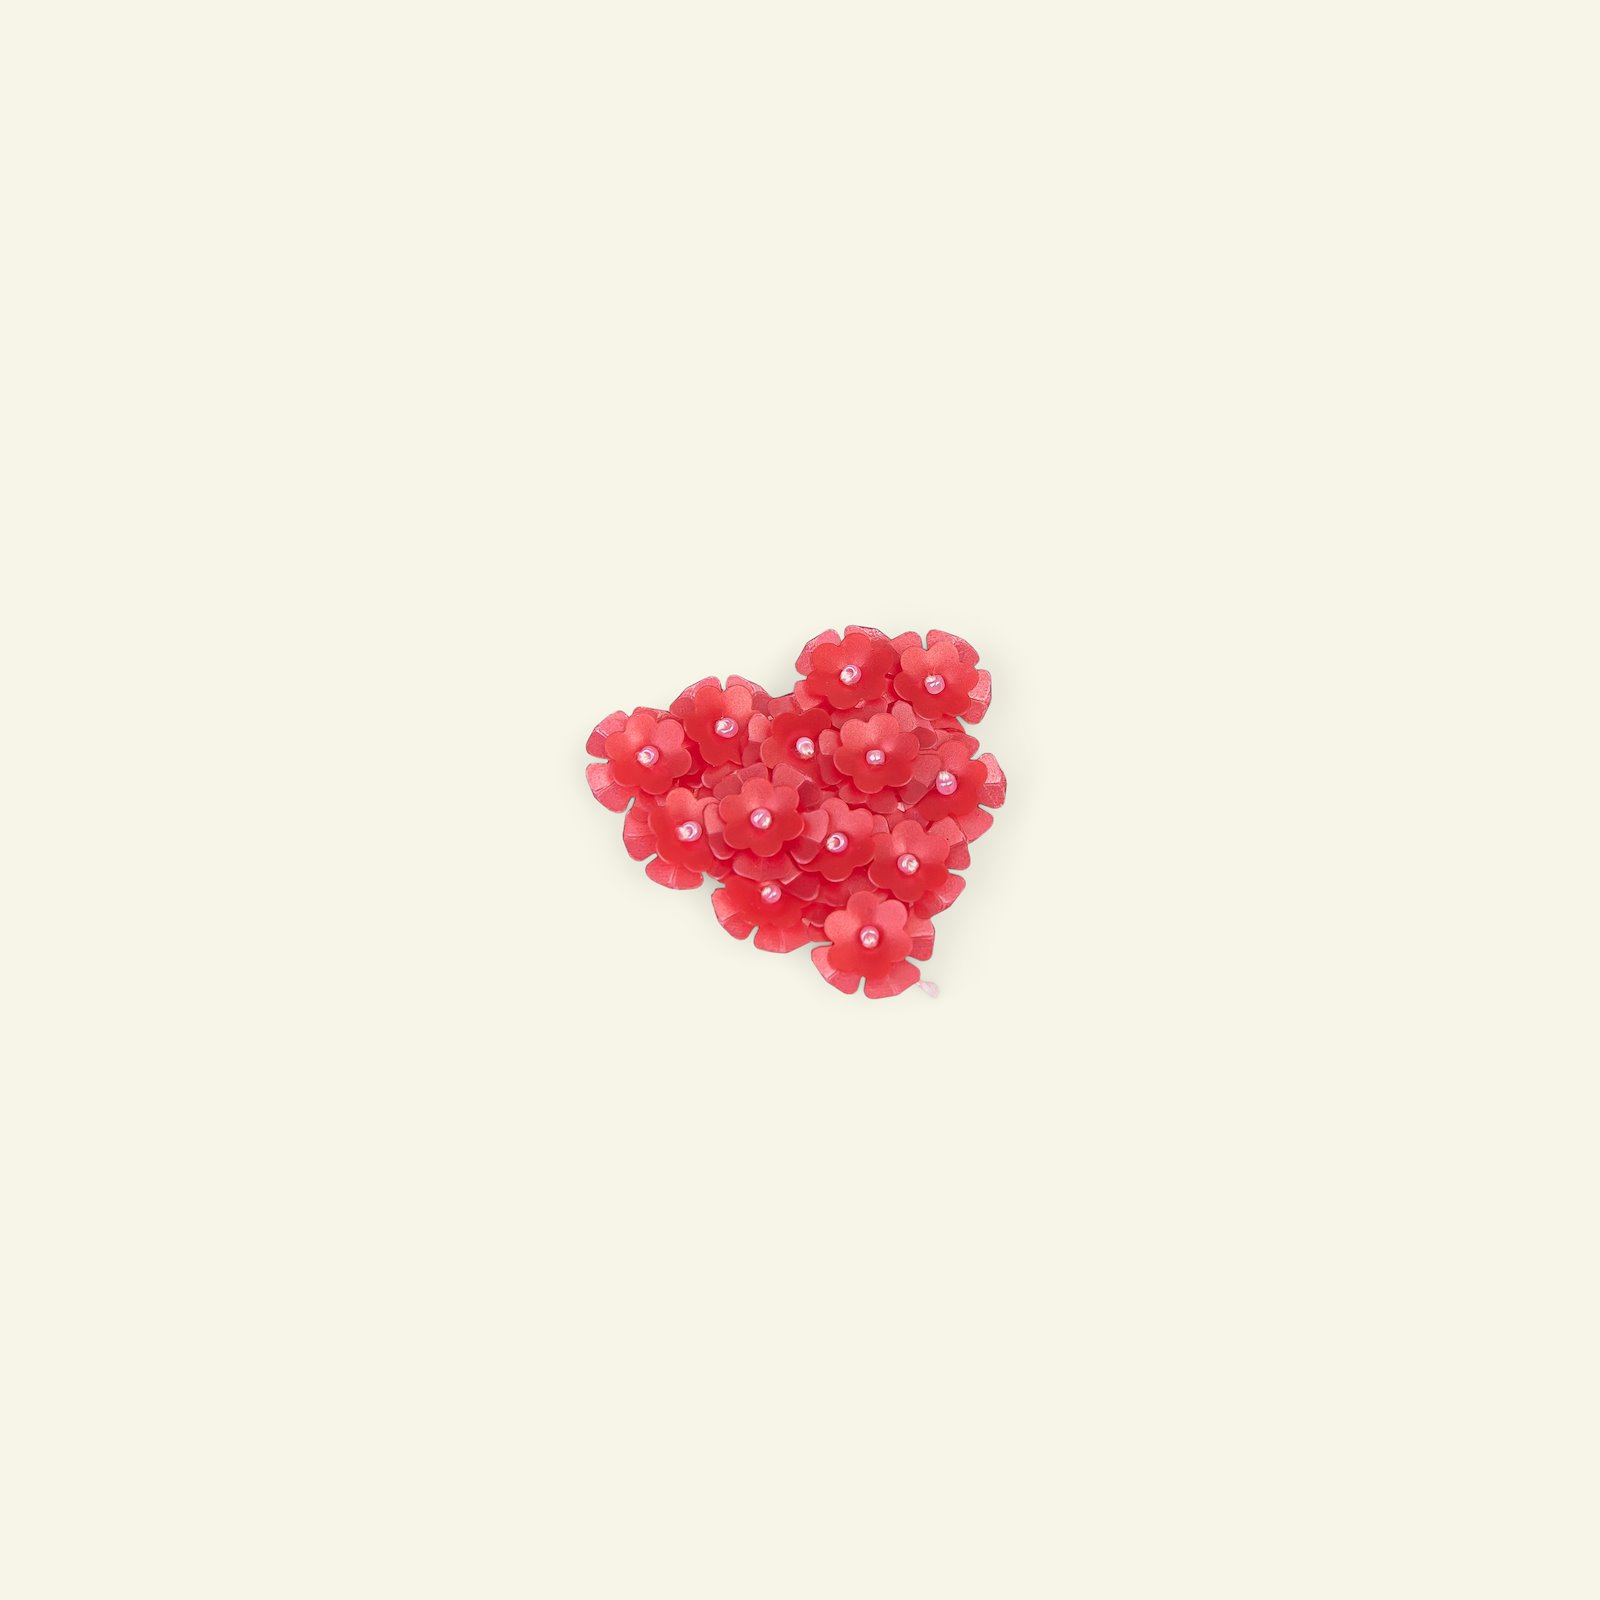 Patch heart 35x33mm sequin red 1pc 26508_pack